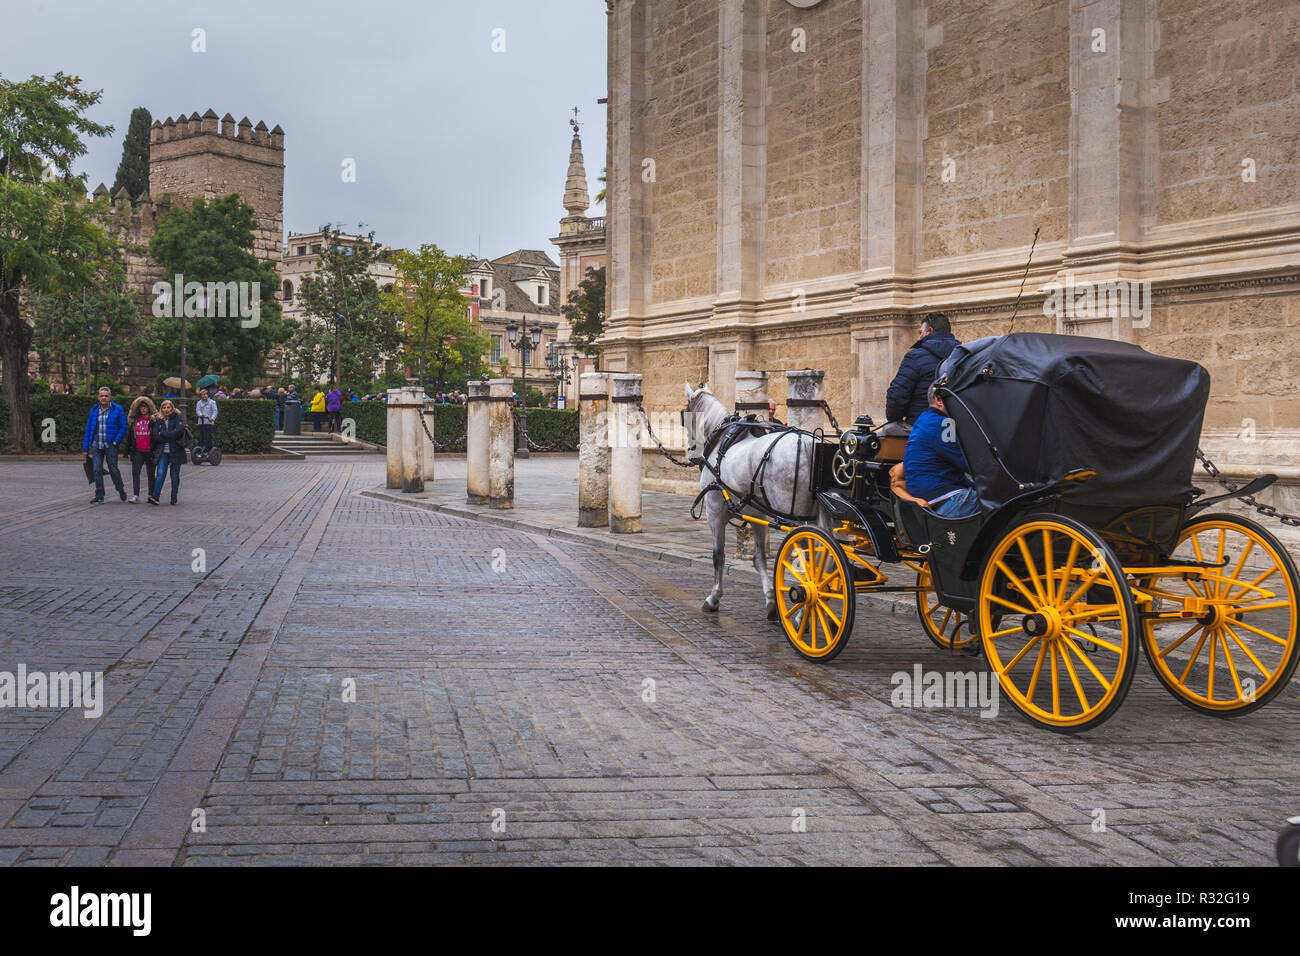 Carriage at Plaza del Triunfo with Cathedral, UNESCO World Heritage Site; Sevilla, Andalusia, Spain Stock Photo